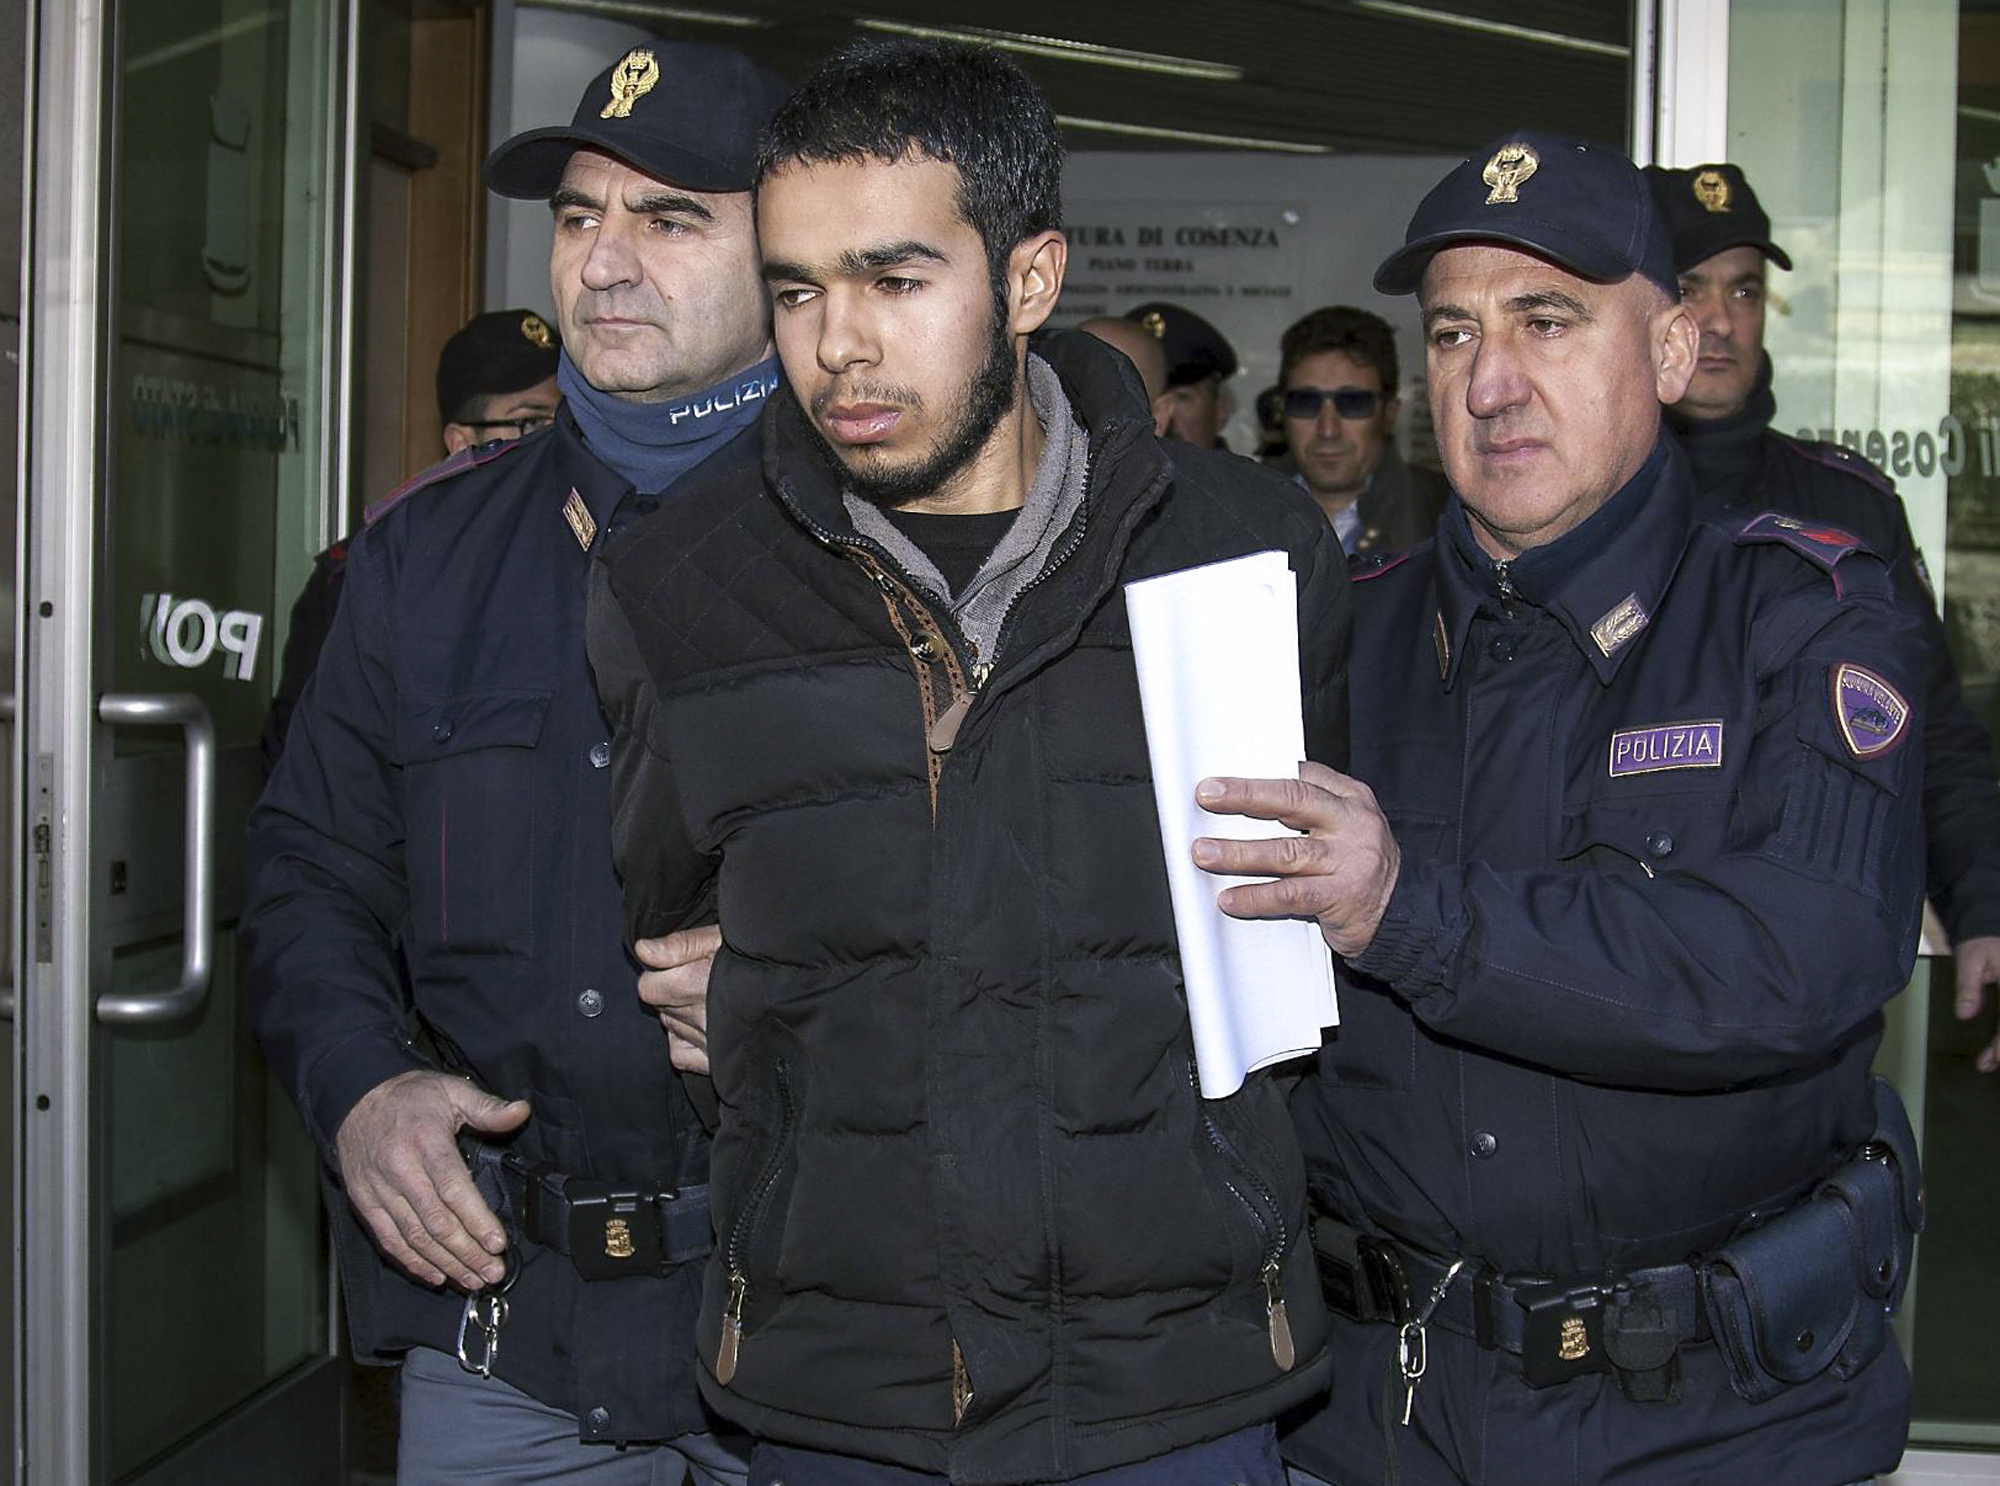 Mehdi Hami, center, is escorted by two officers as he leaves Cosenza's Police headquarters, Italy, Monday, Jan. 25, 2016. Italian authorities have arrested a Moroccan citizen living in southern Italy suspected of seeking to train as a foreign fighter for Islamic State. Italian police said in a statement that they arrested 25-year-old Mehdi Hamil who had been under investigation since July when he was stopped at Rome's international airport after being refused entry to Turkey. (Francesco Arena/ANSA via AP)